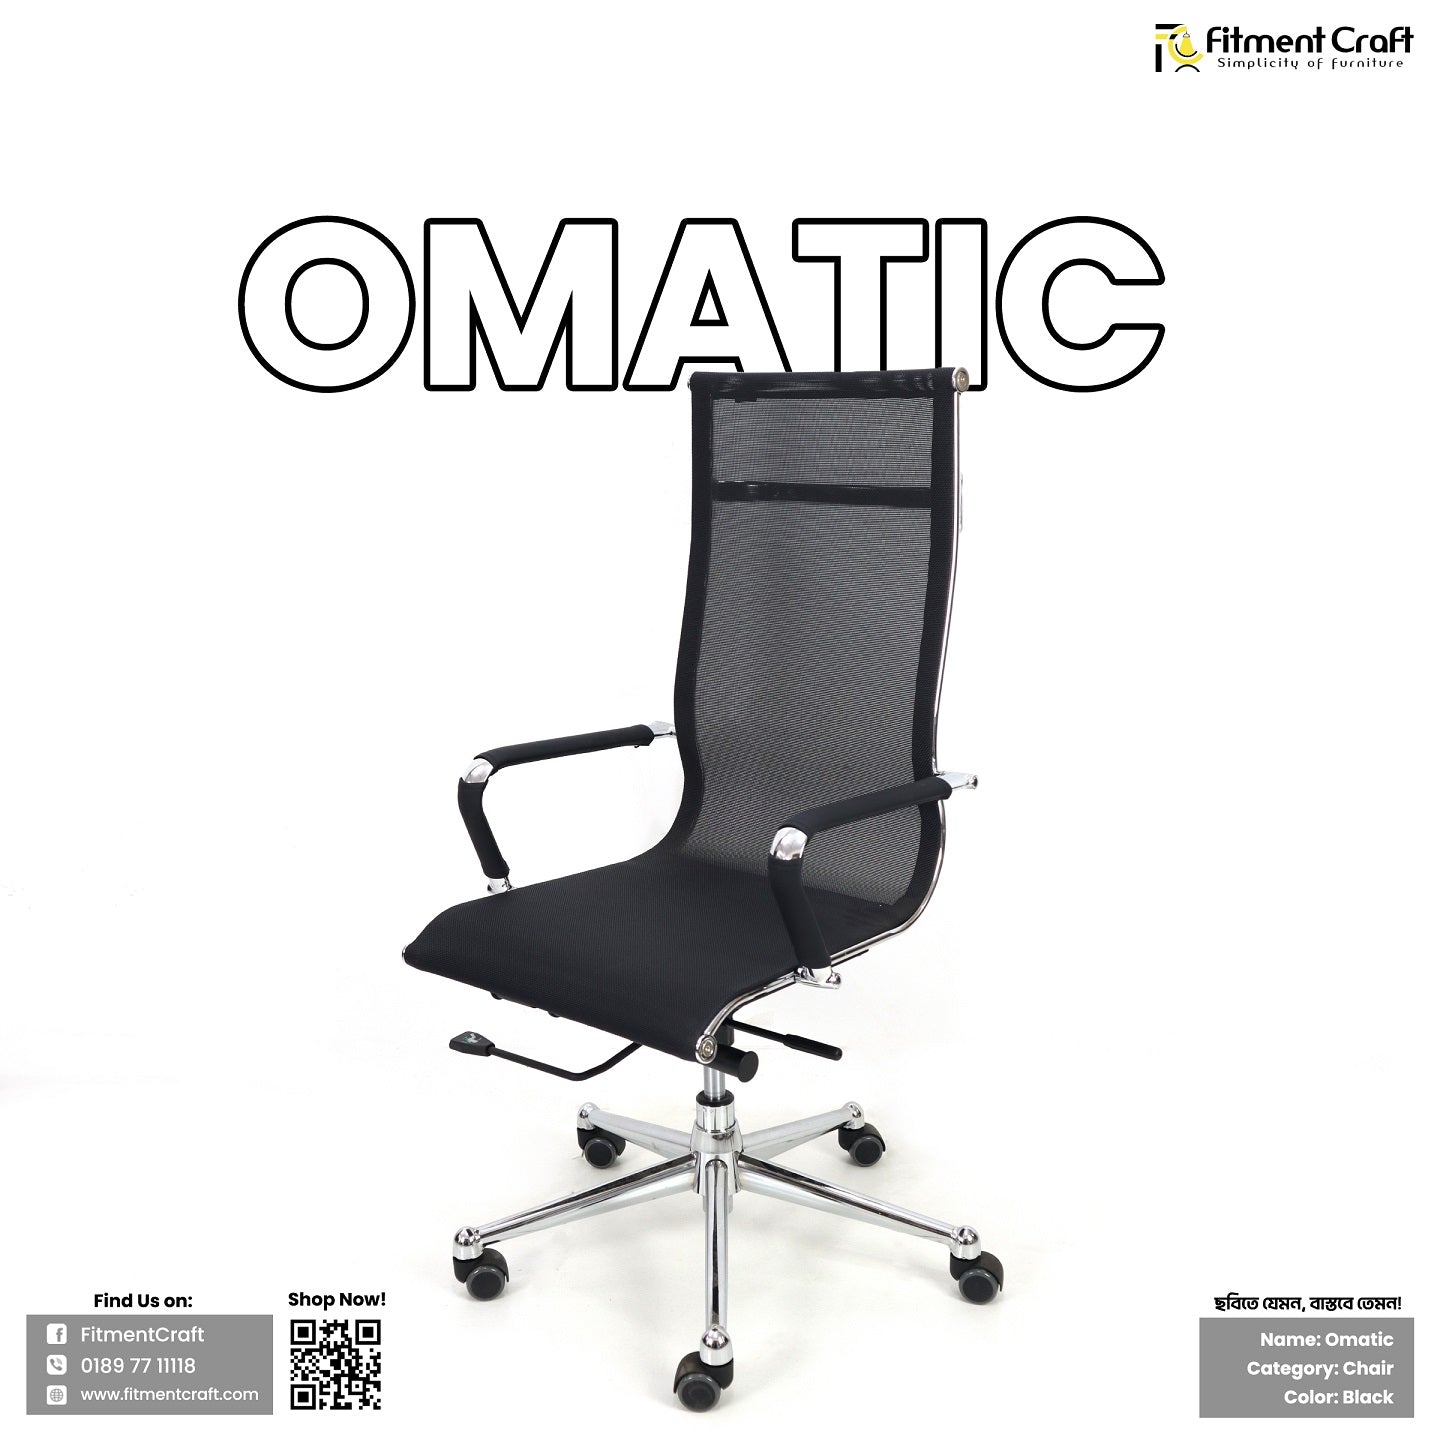 Omatic Chair